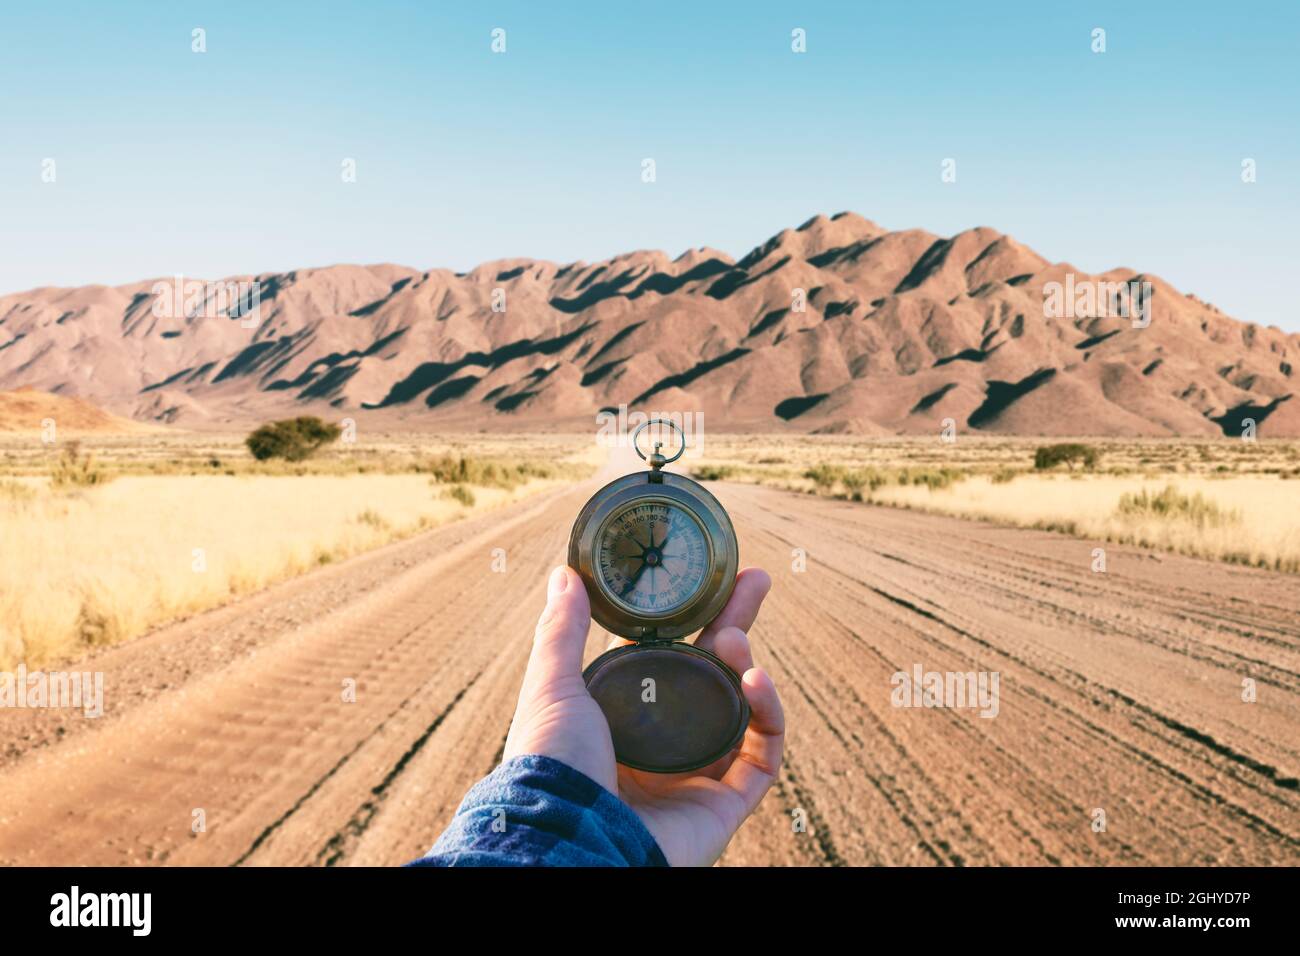 Man with old metal compass in hand on gravel road in Namibia, Africa. Travel concept. Landscape photography Stock Photo